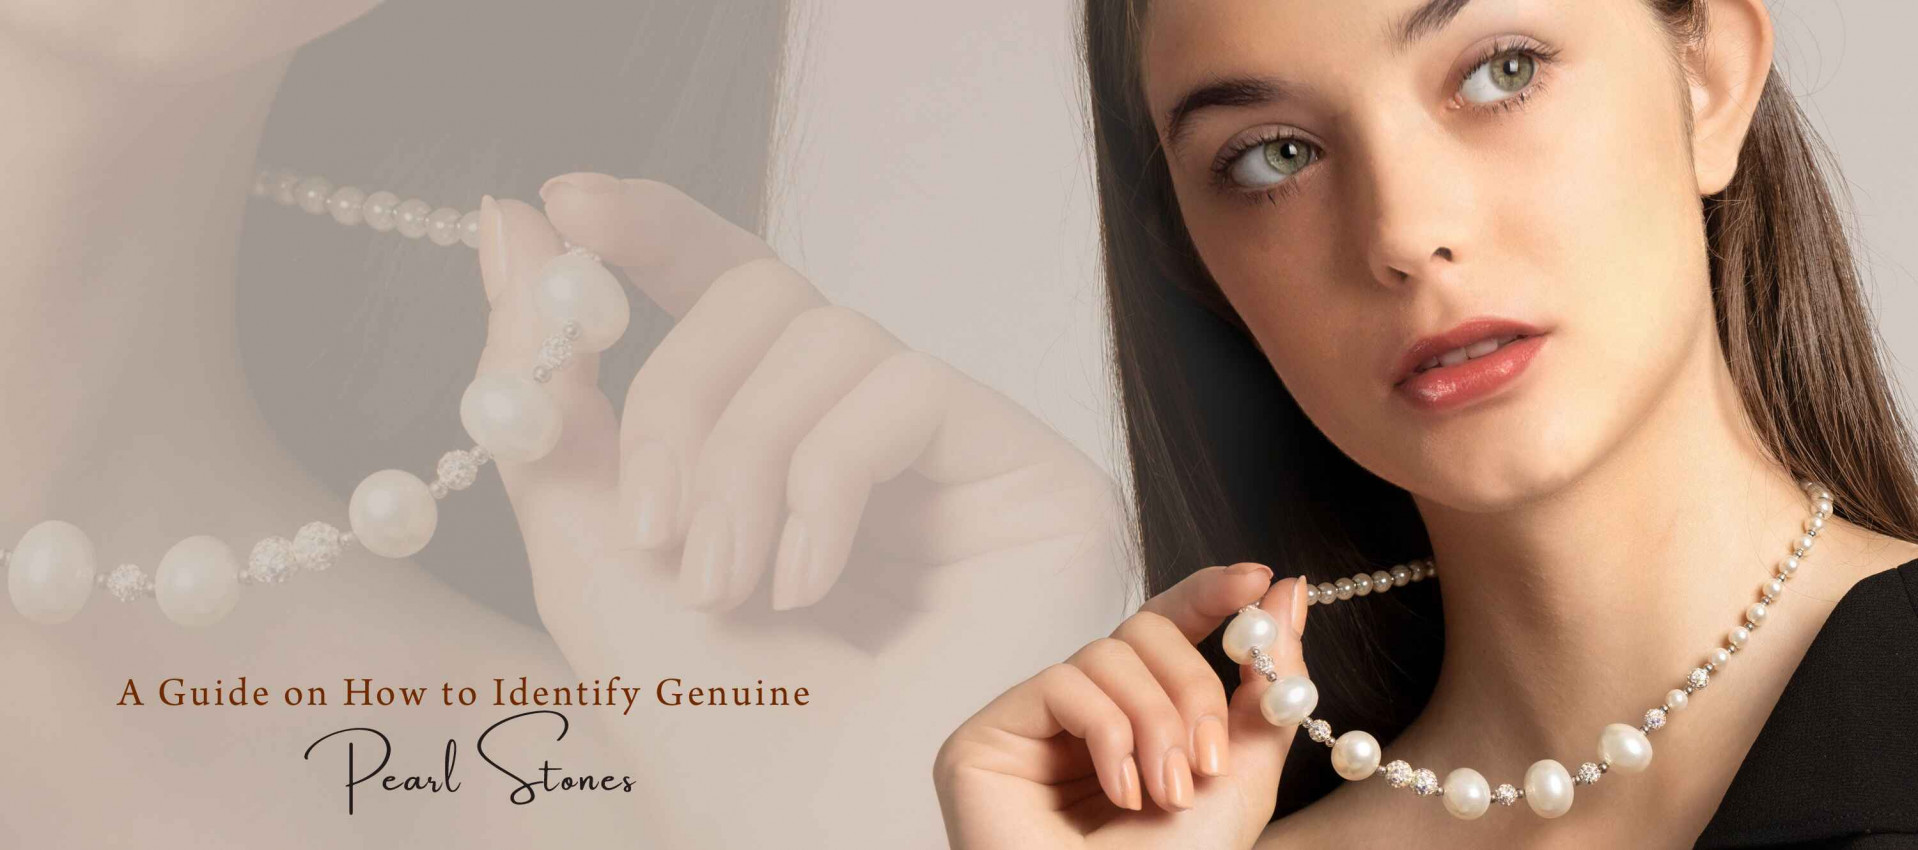 A Guide on How to Identify Genuine Pearl Stones